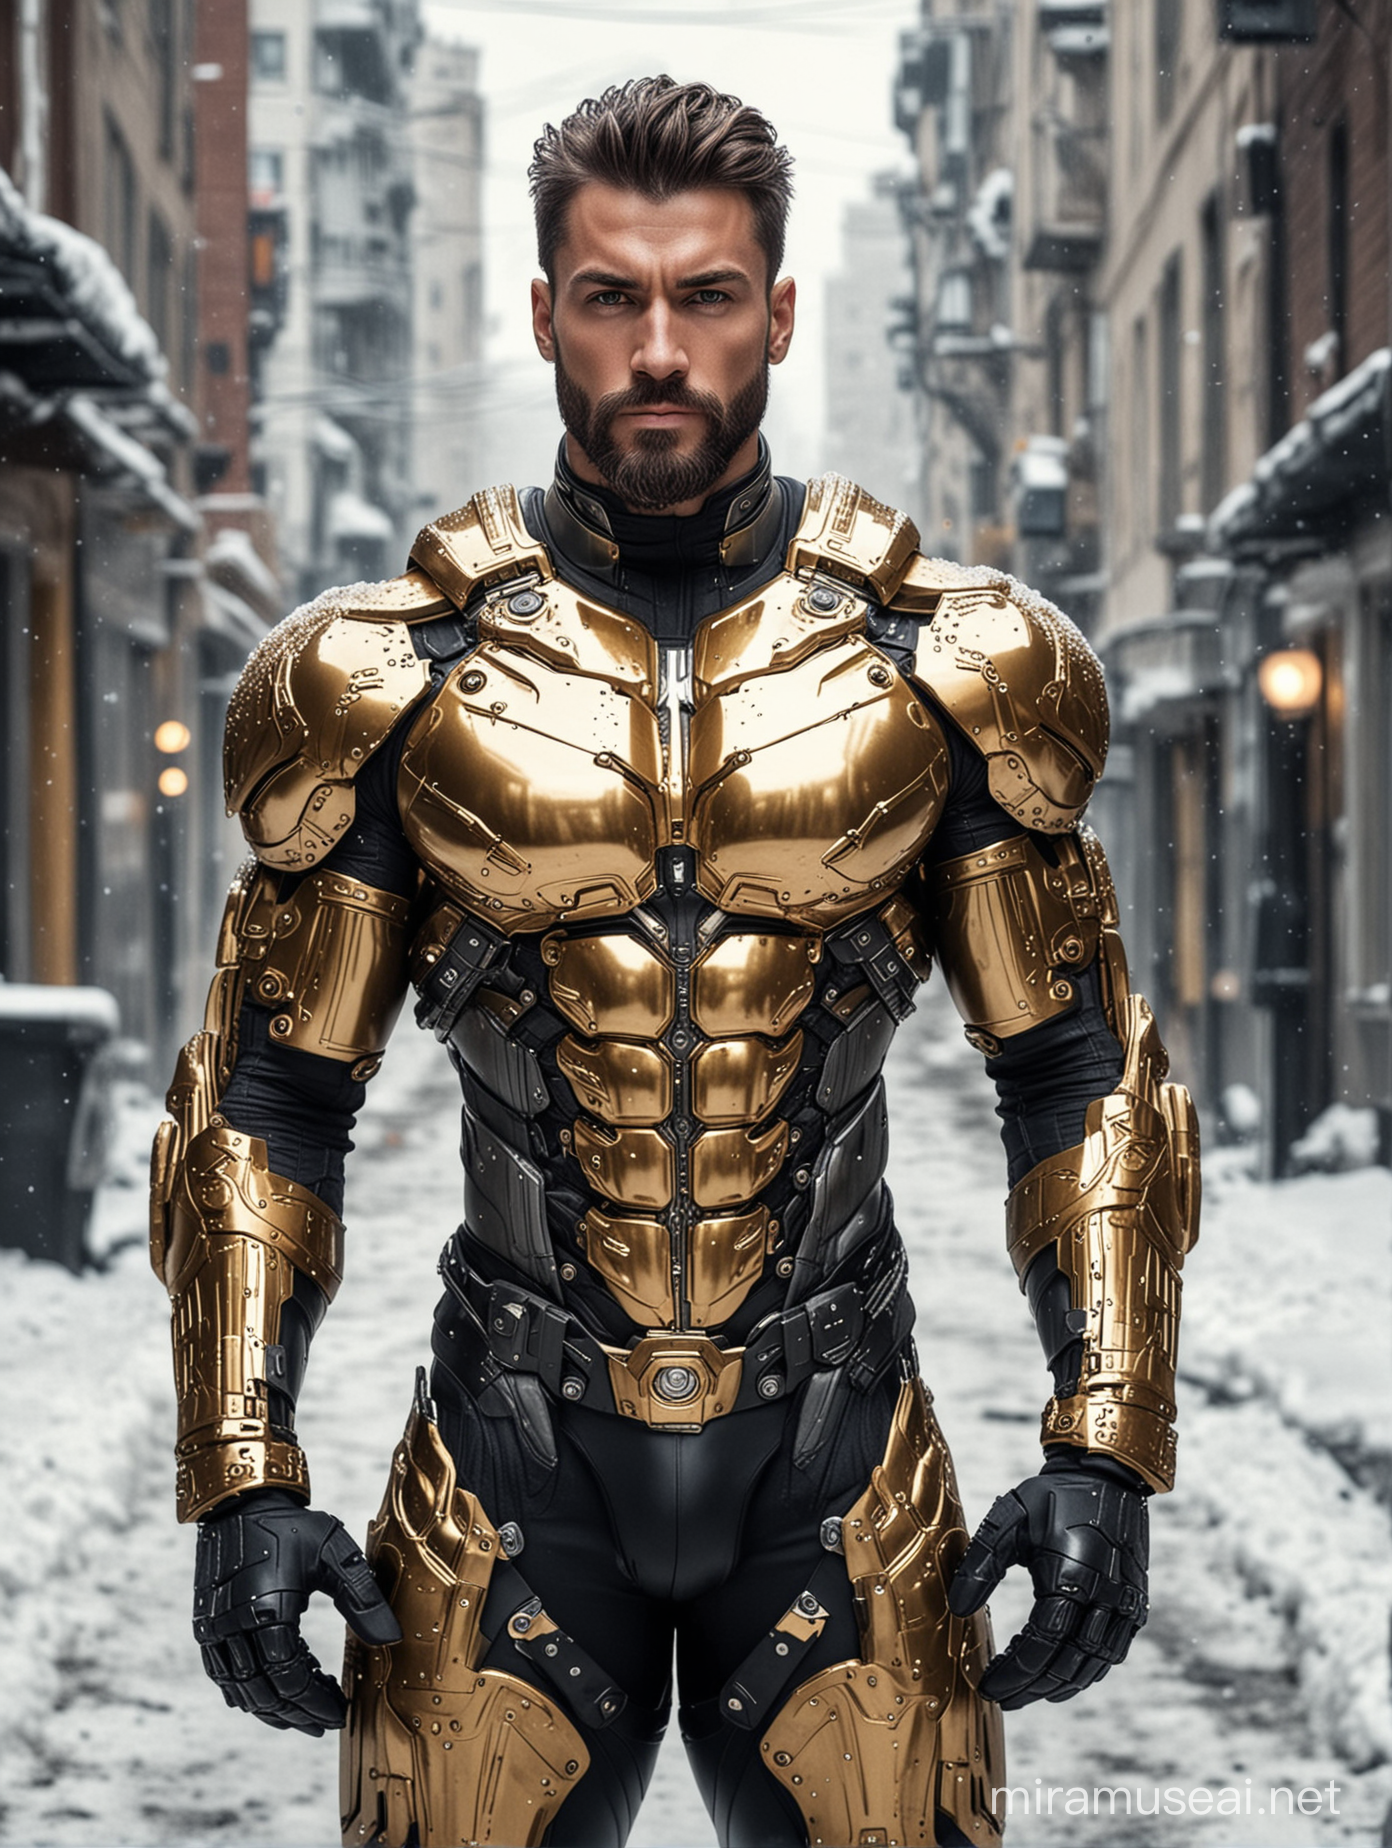 Tall and handsome bodybuilder men with beautiful hairstyle and beard with attractive eyes and Big wide shoulder and chest in sci-fi High Tech golden, sliver and black armour suit with firearms walking on snowy street